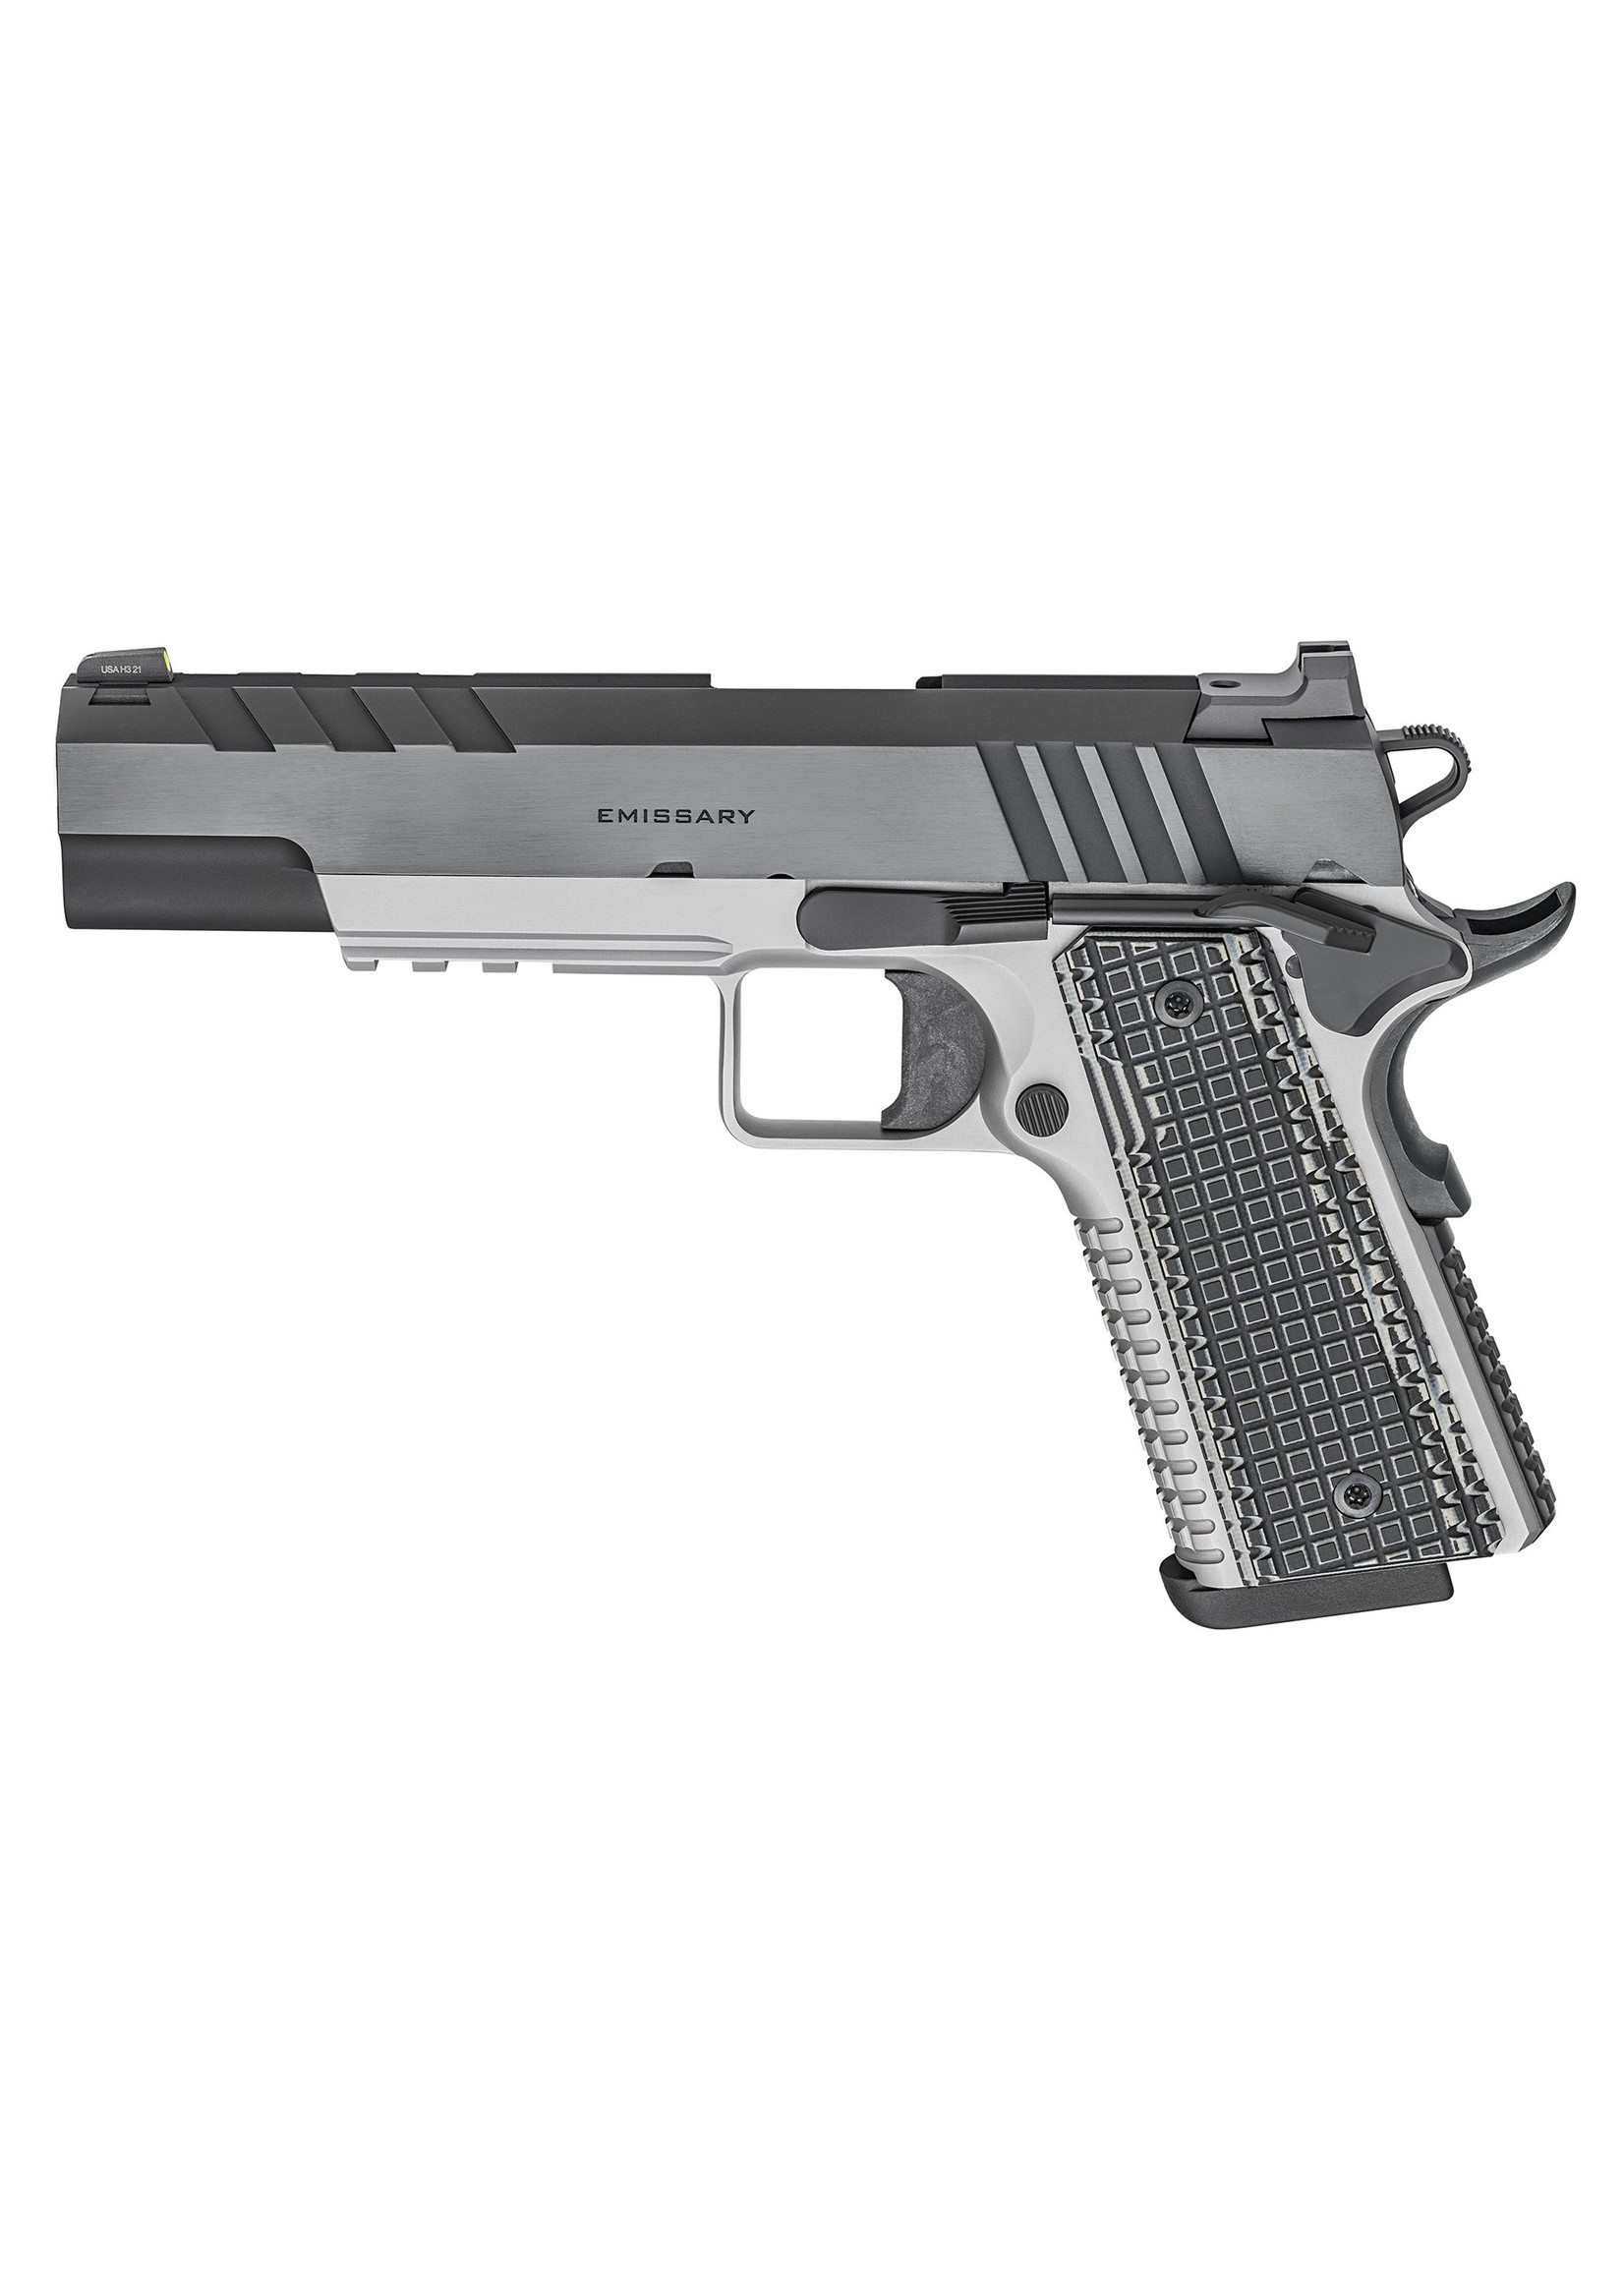 Springfield Armory Springfield Armory PX9217L 1911 Emissary 9mm Luger 9+1 4.25" Bull Barrel, Stainless Steel Frame w/ Beavertail, Serrated Blued Carbon Steel Slide, Black VZ Thin-Line G10 Grip